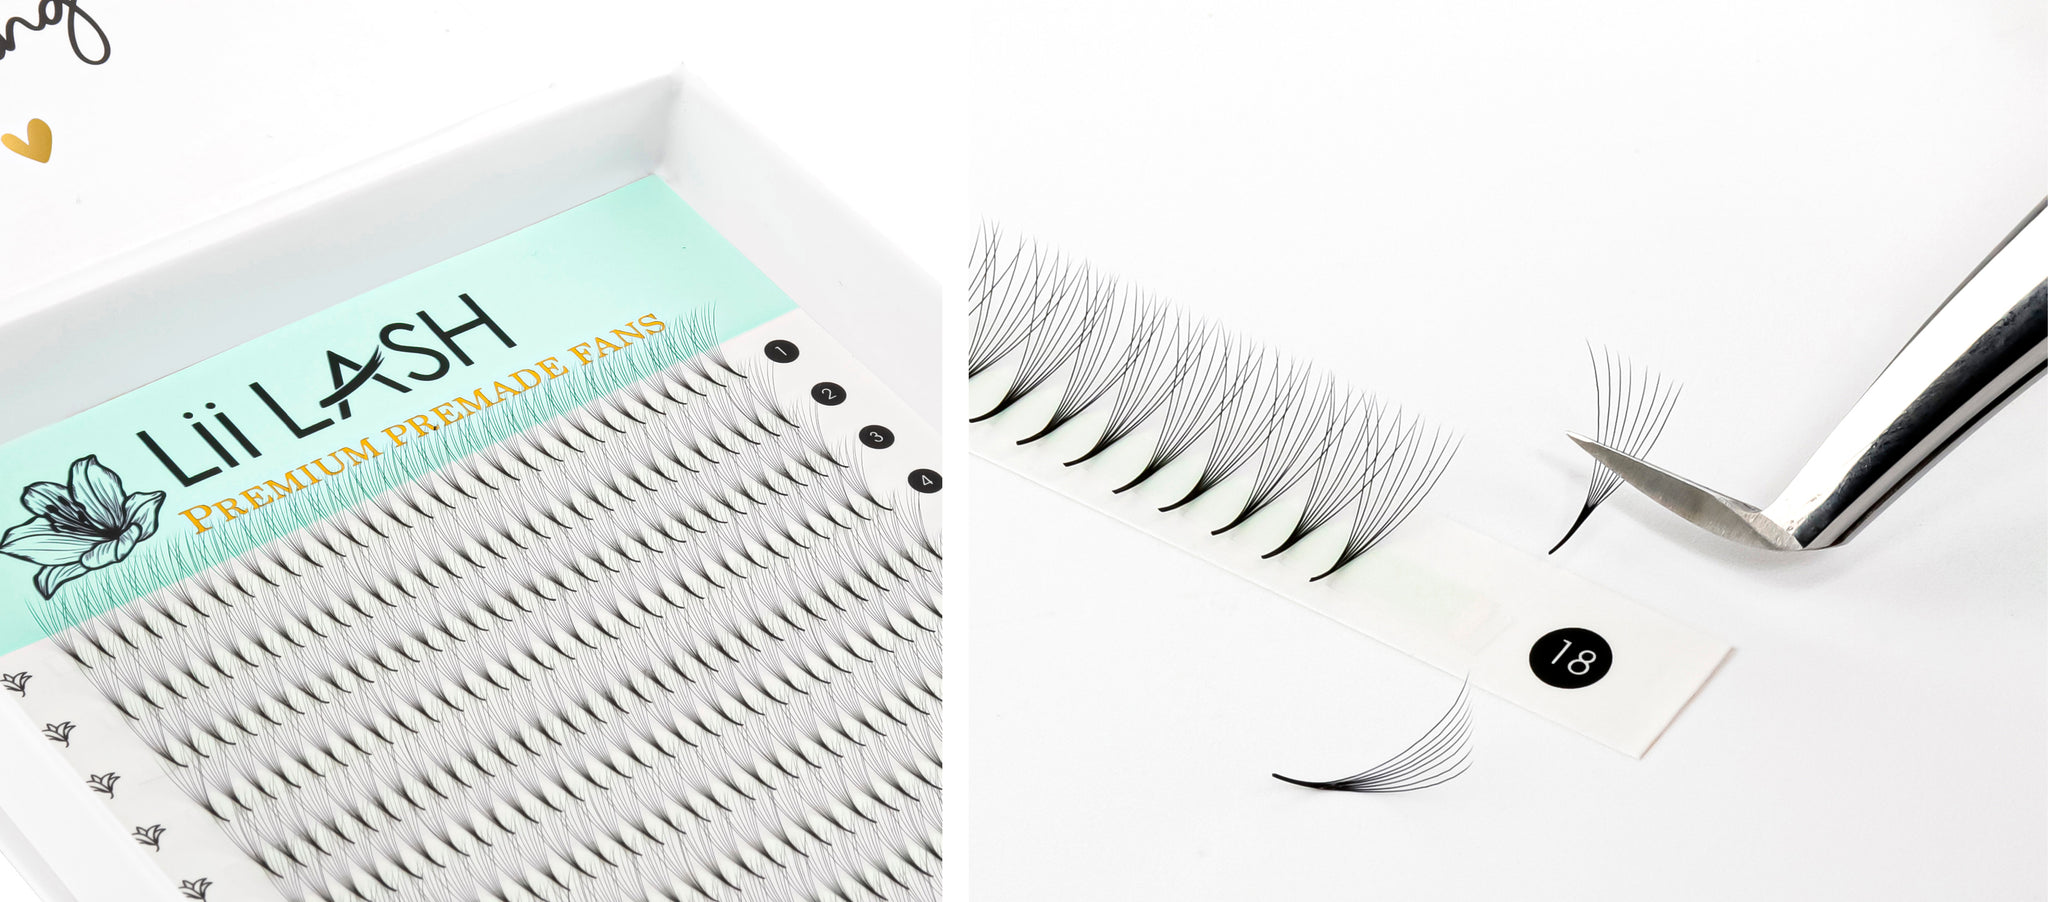 An image displaying a premade fan big tray, neatly packed with lash fans arranged in tape strips. The strips are evenly distributed in a vertical layout within the tray. This design is tailored to assist lash artists in effortless fan pickup within seconds